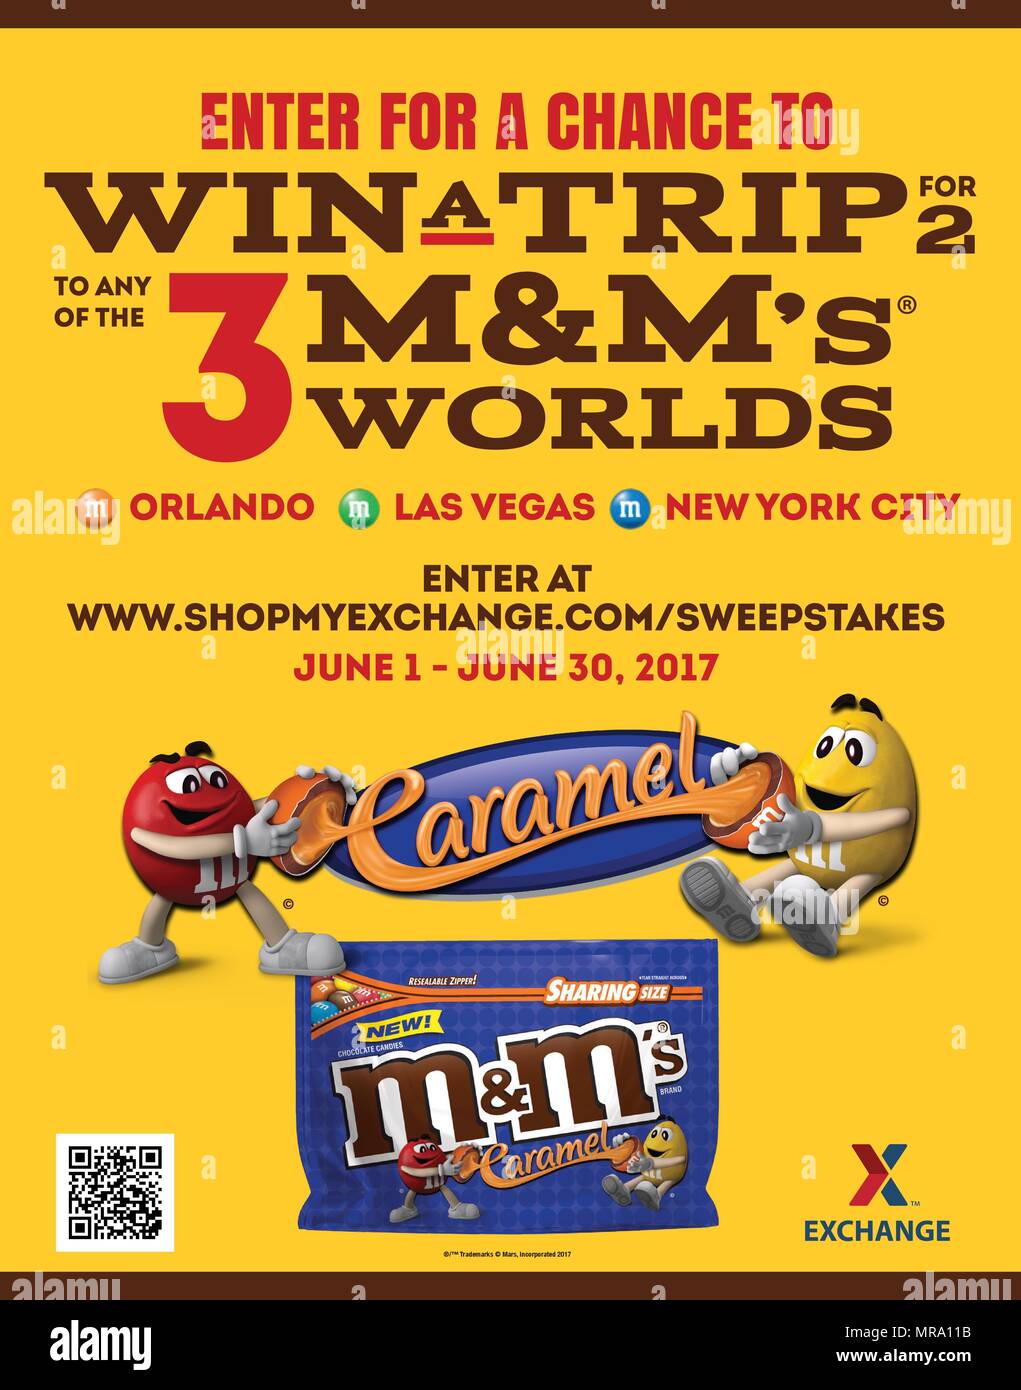 Authorized Exchange shoppers worldwide can enter the M&M’s World Sweepstakes June 1 to June 30 for a chance to win a trip for two to one of three M&M's World Locations. Stock Photo